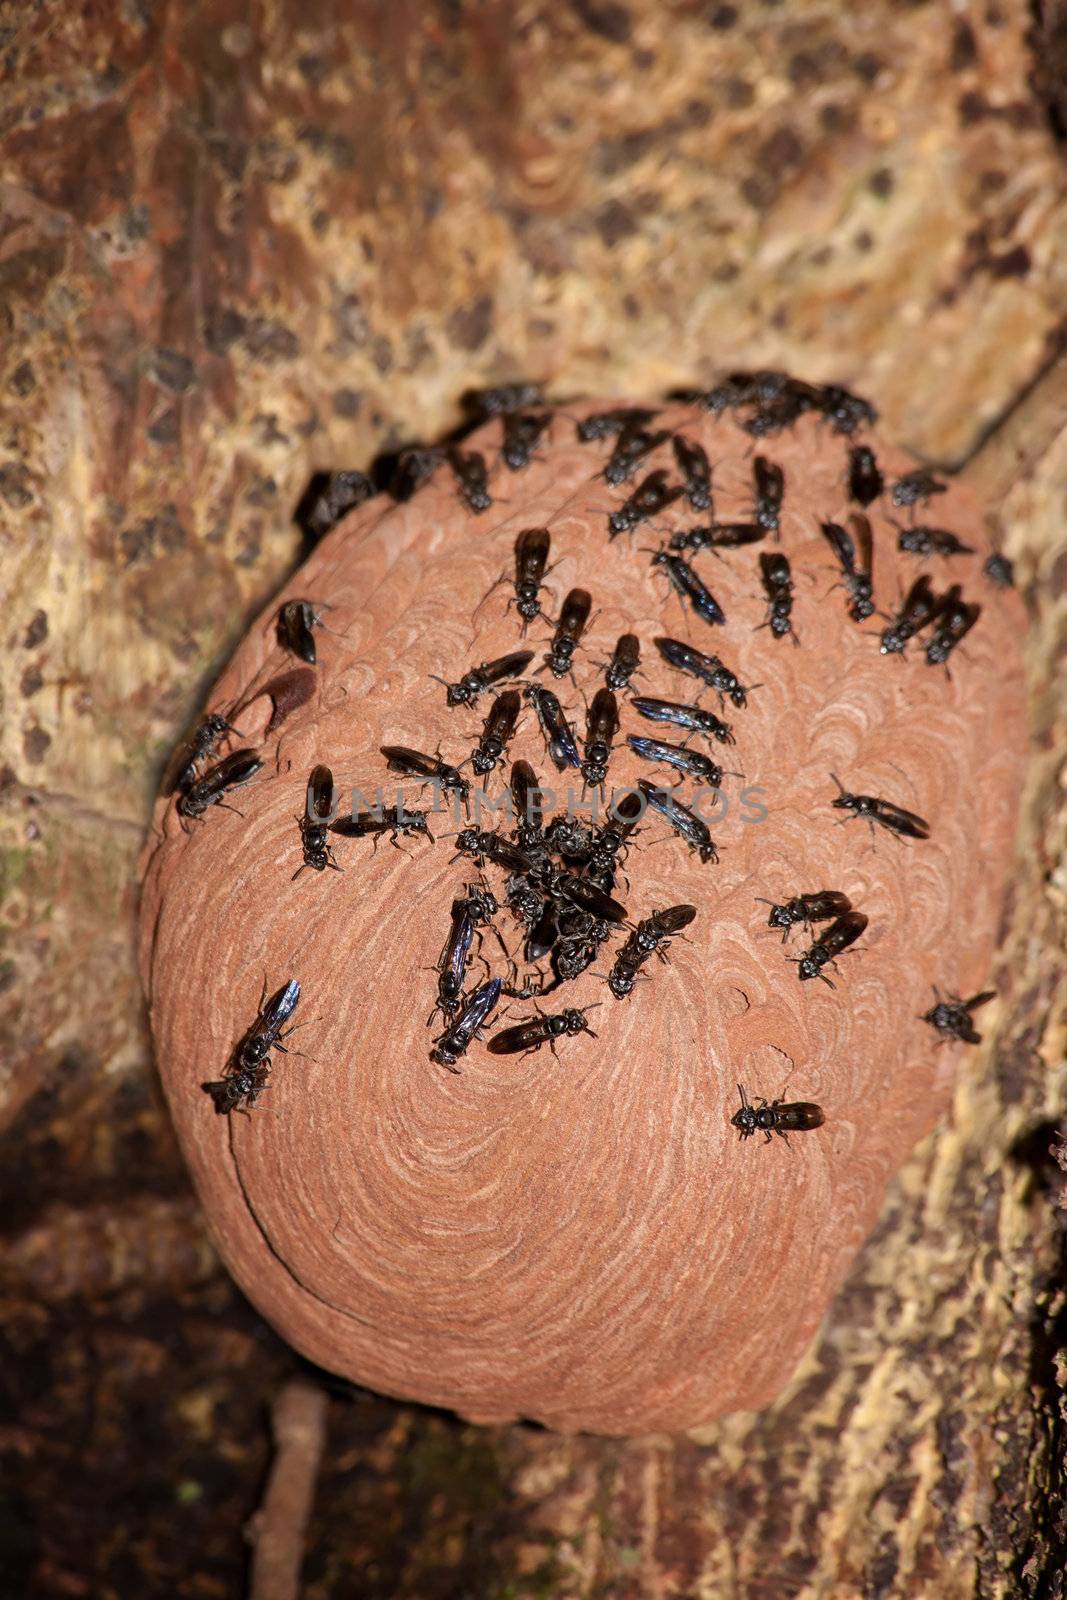 Paper wasps with nest by Creatista